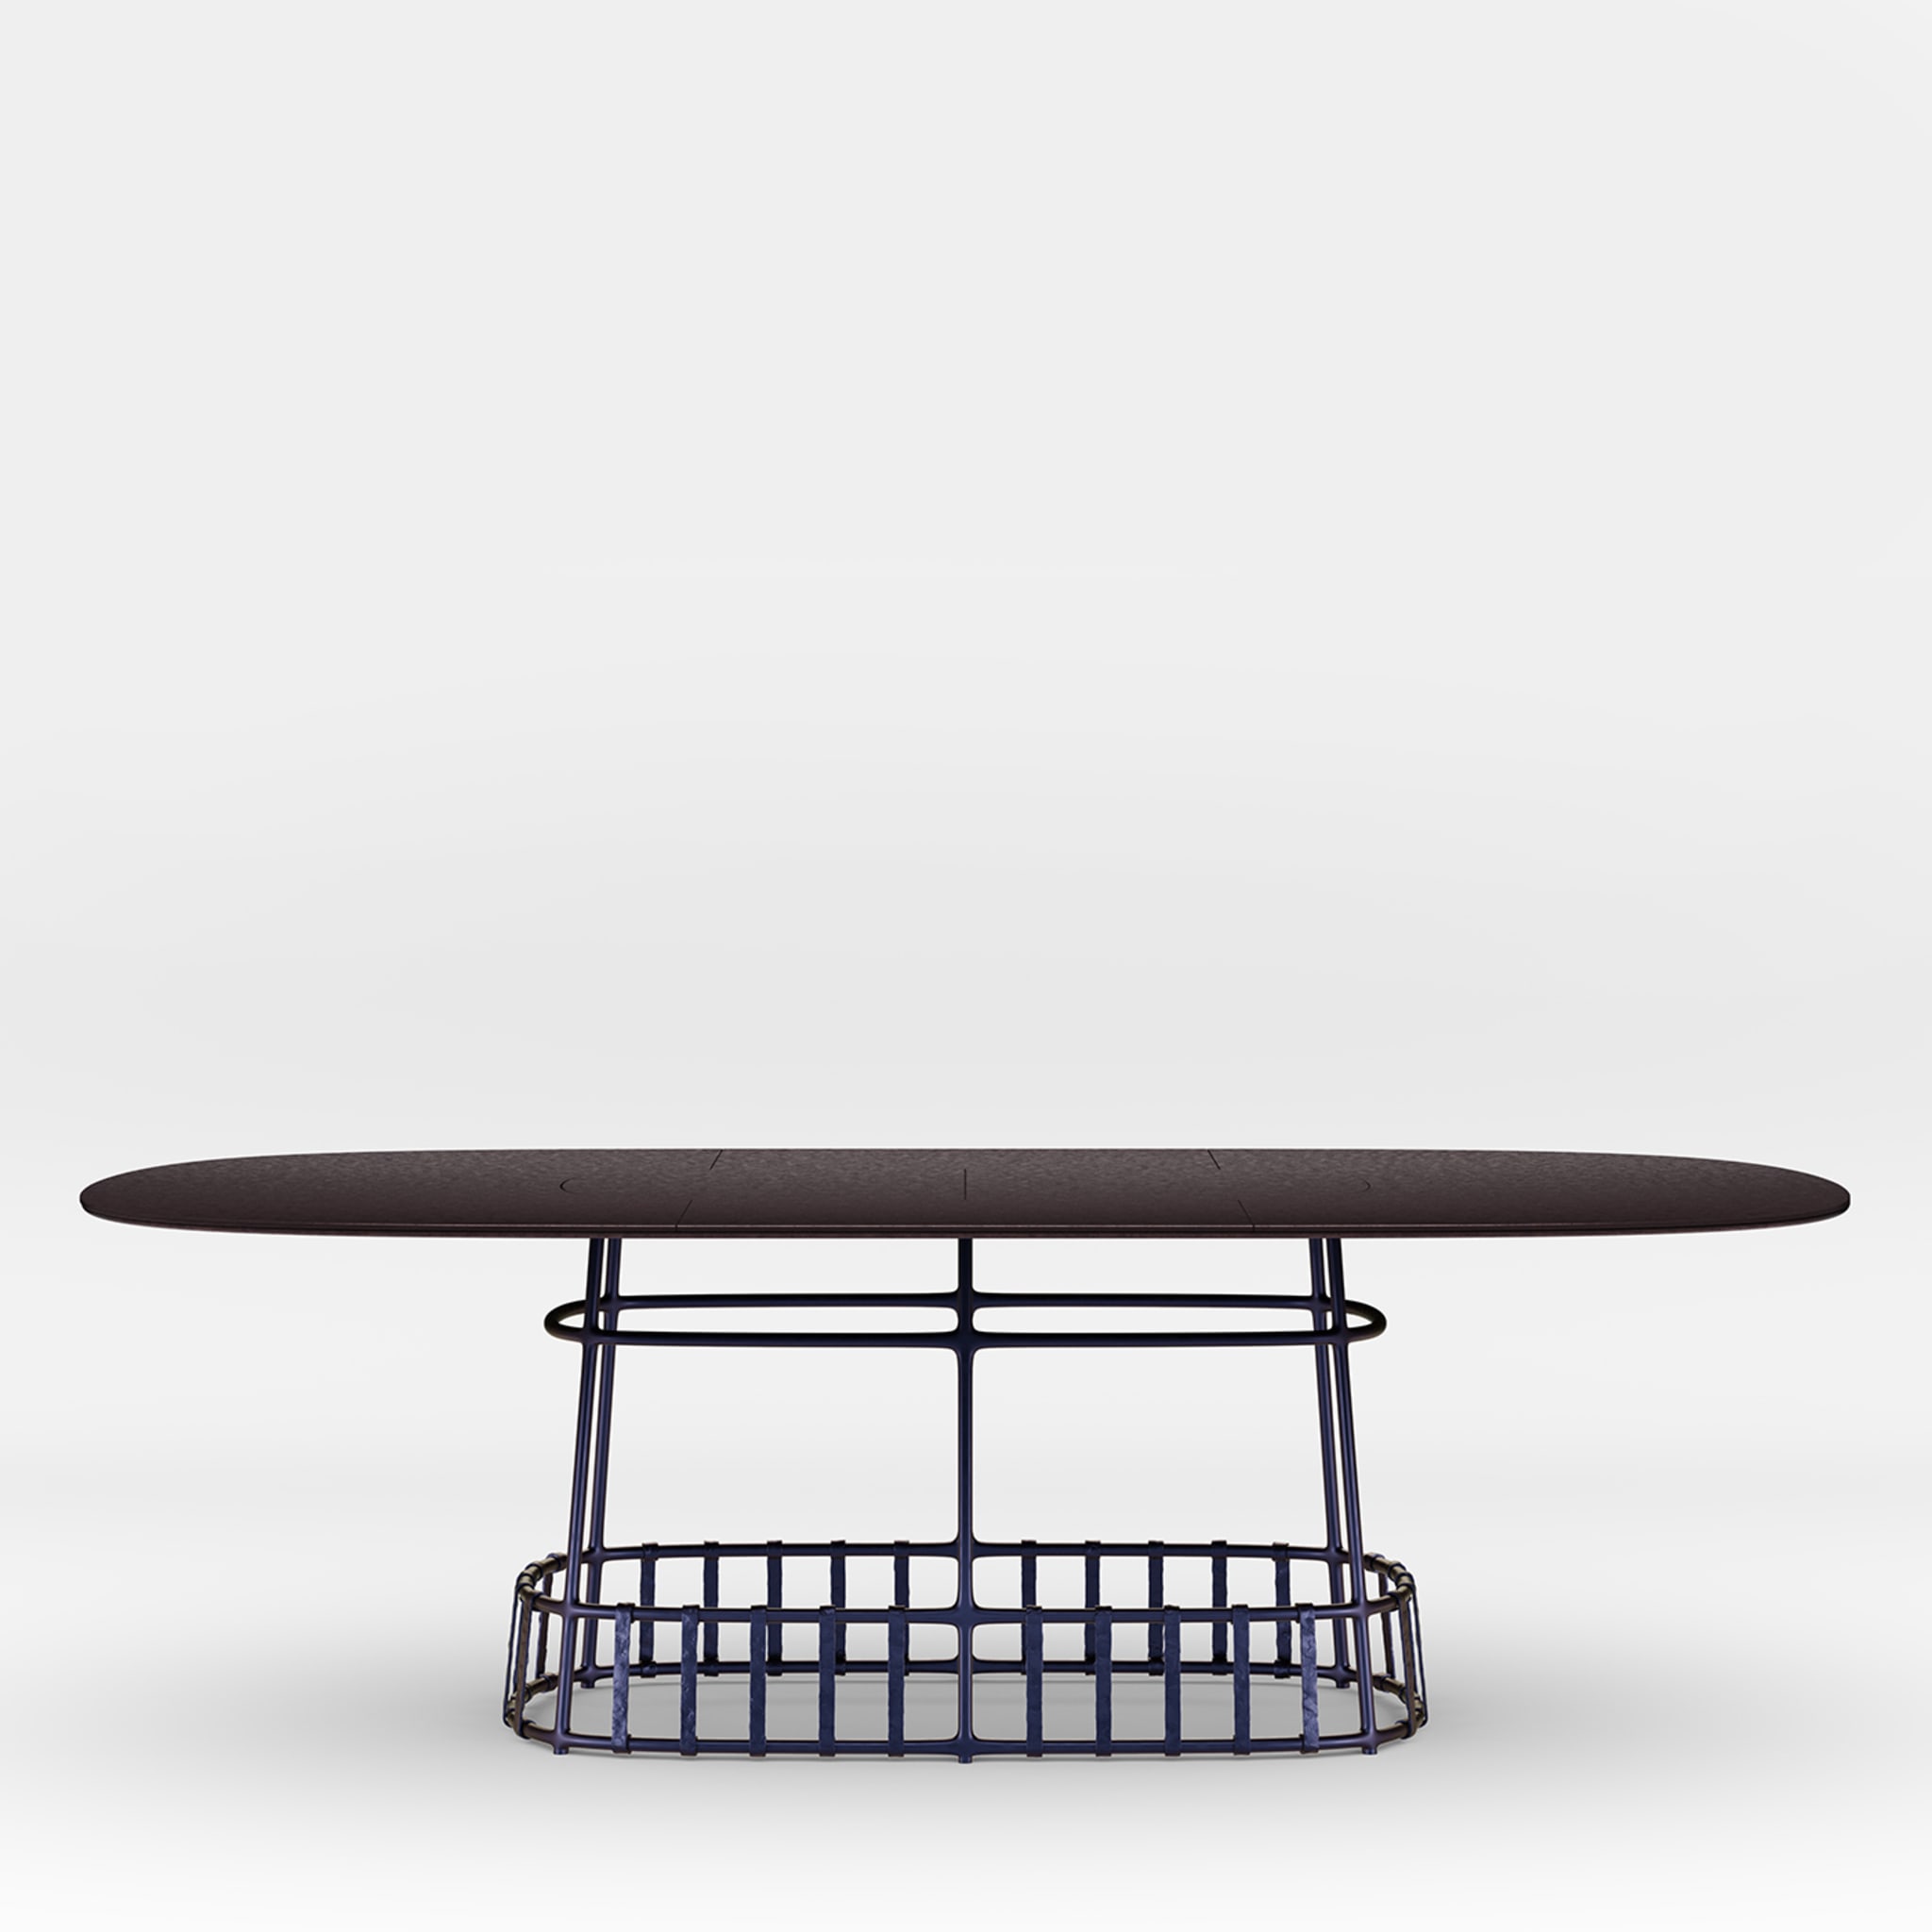 Dolmen Oval Dining Table by Margherita Rui - Alternative view 2